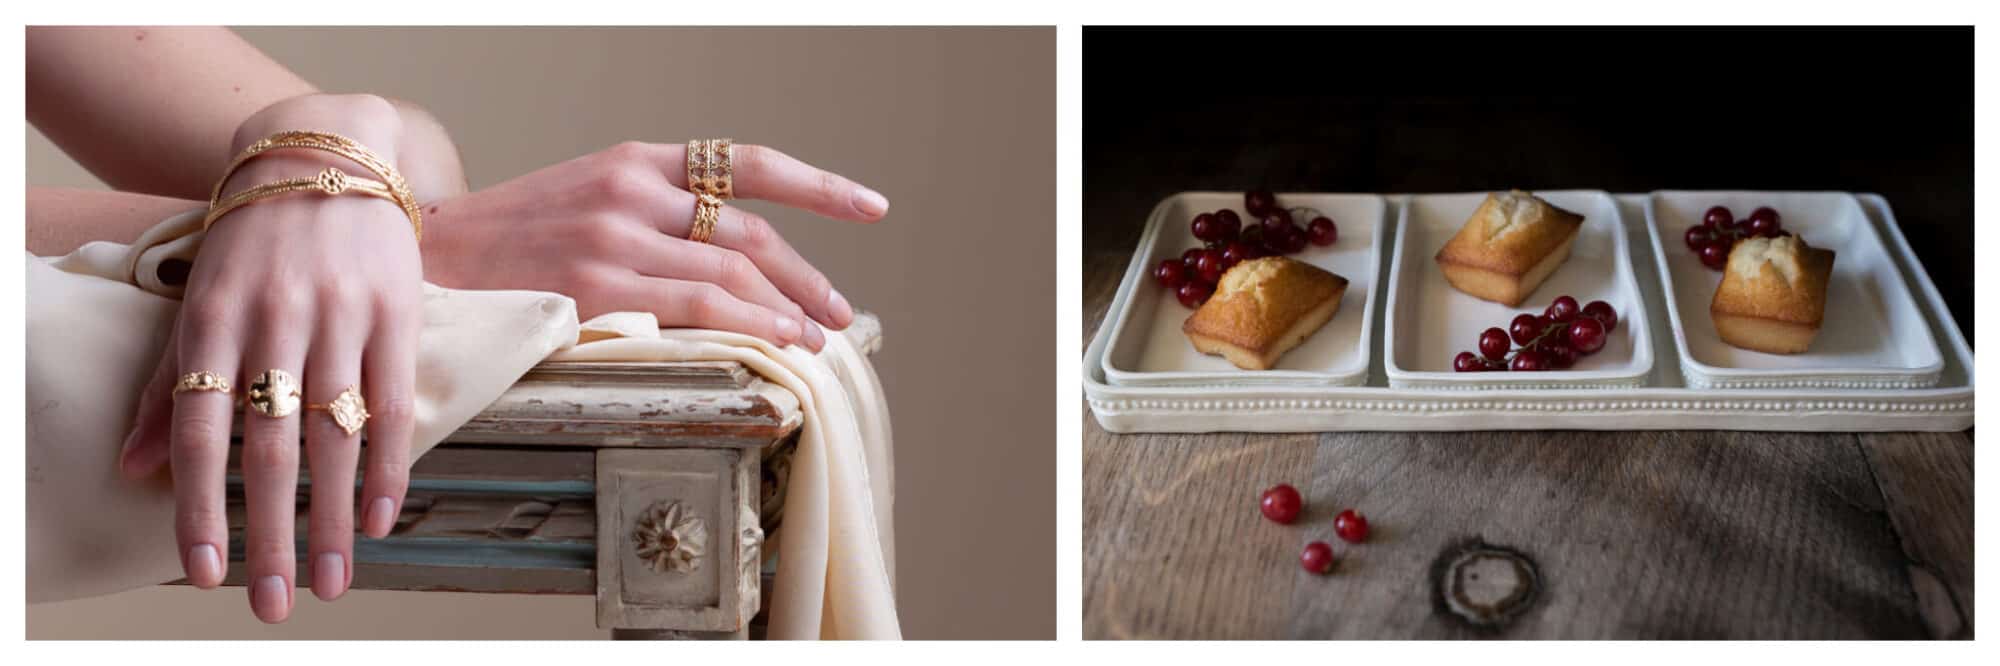 Left: two hands wearing gold rings and bracelets lay atop each other, posed on a table, Right: Grapes and small baked goods sit in white porcelain rectangular bowls atop a wooden table